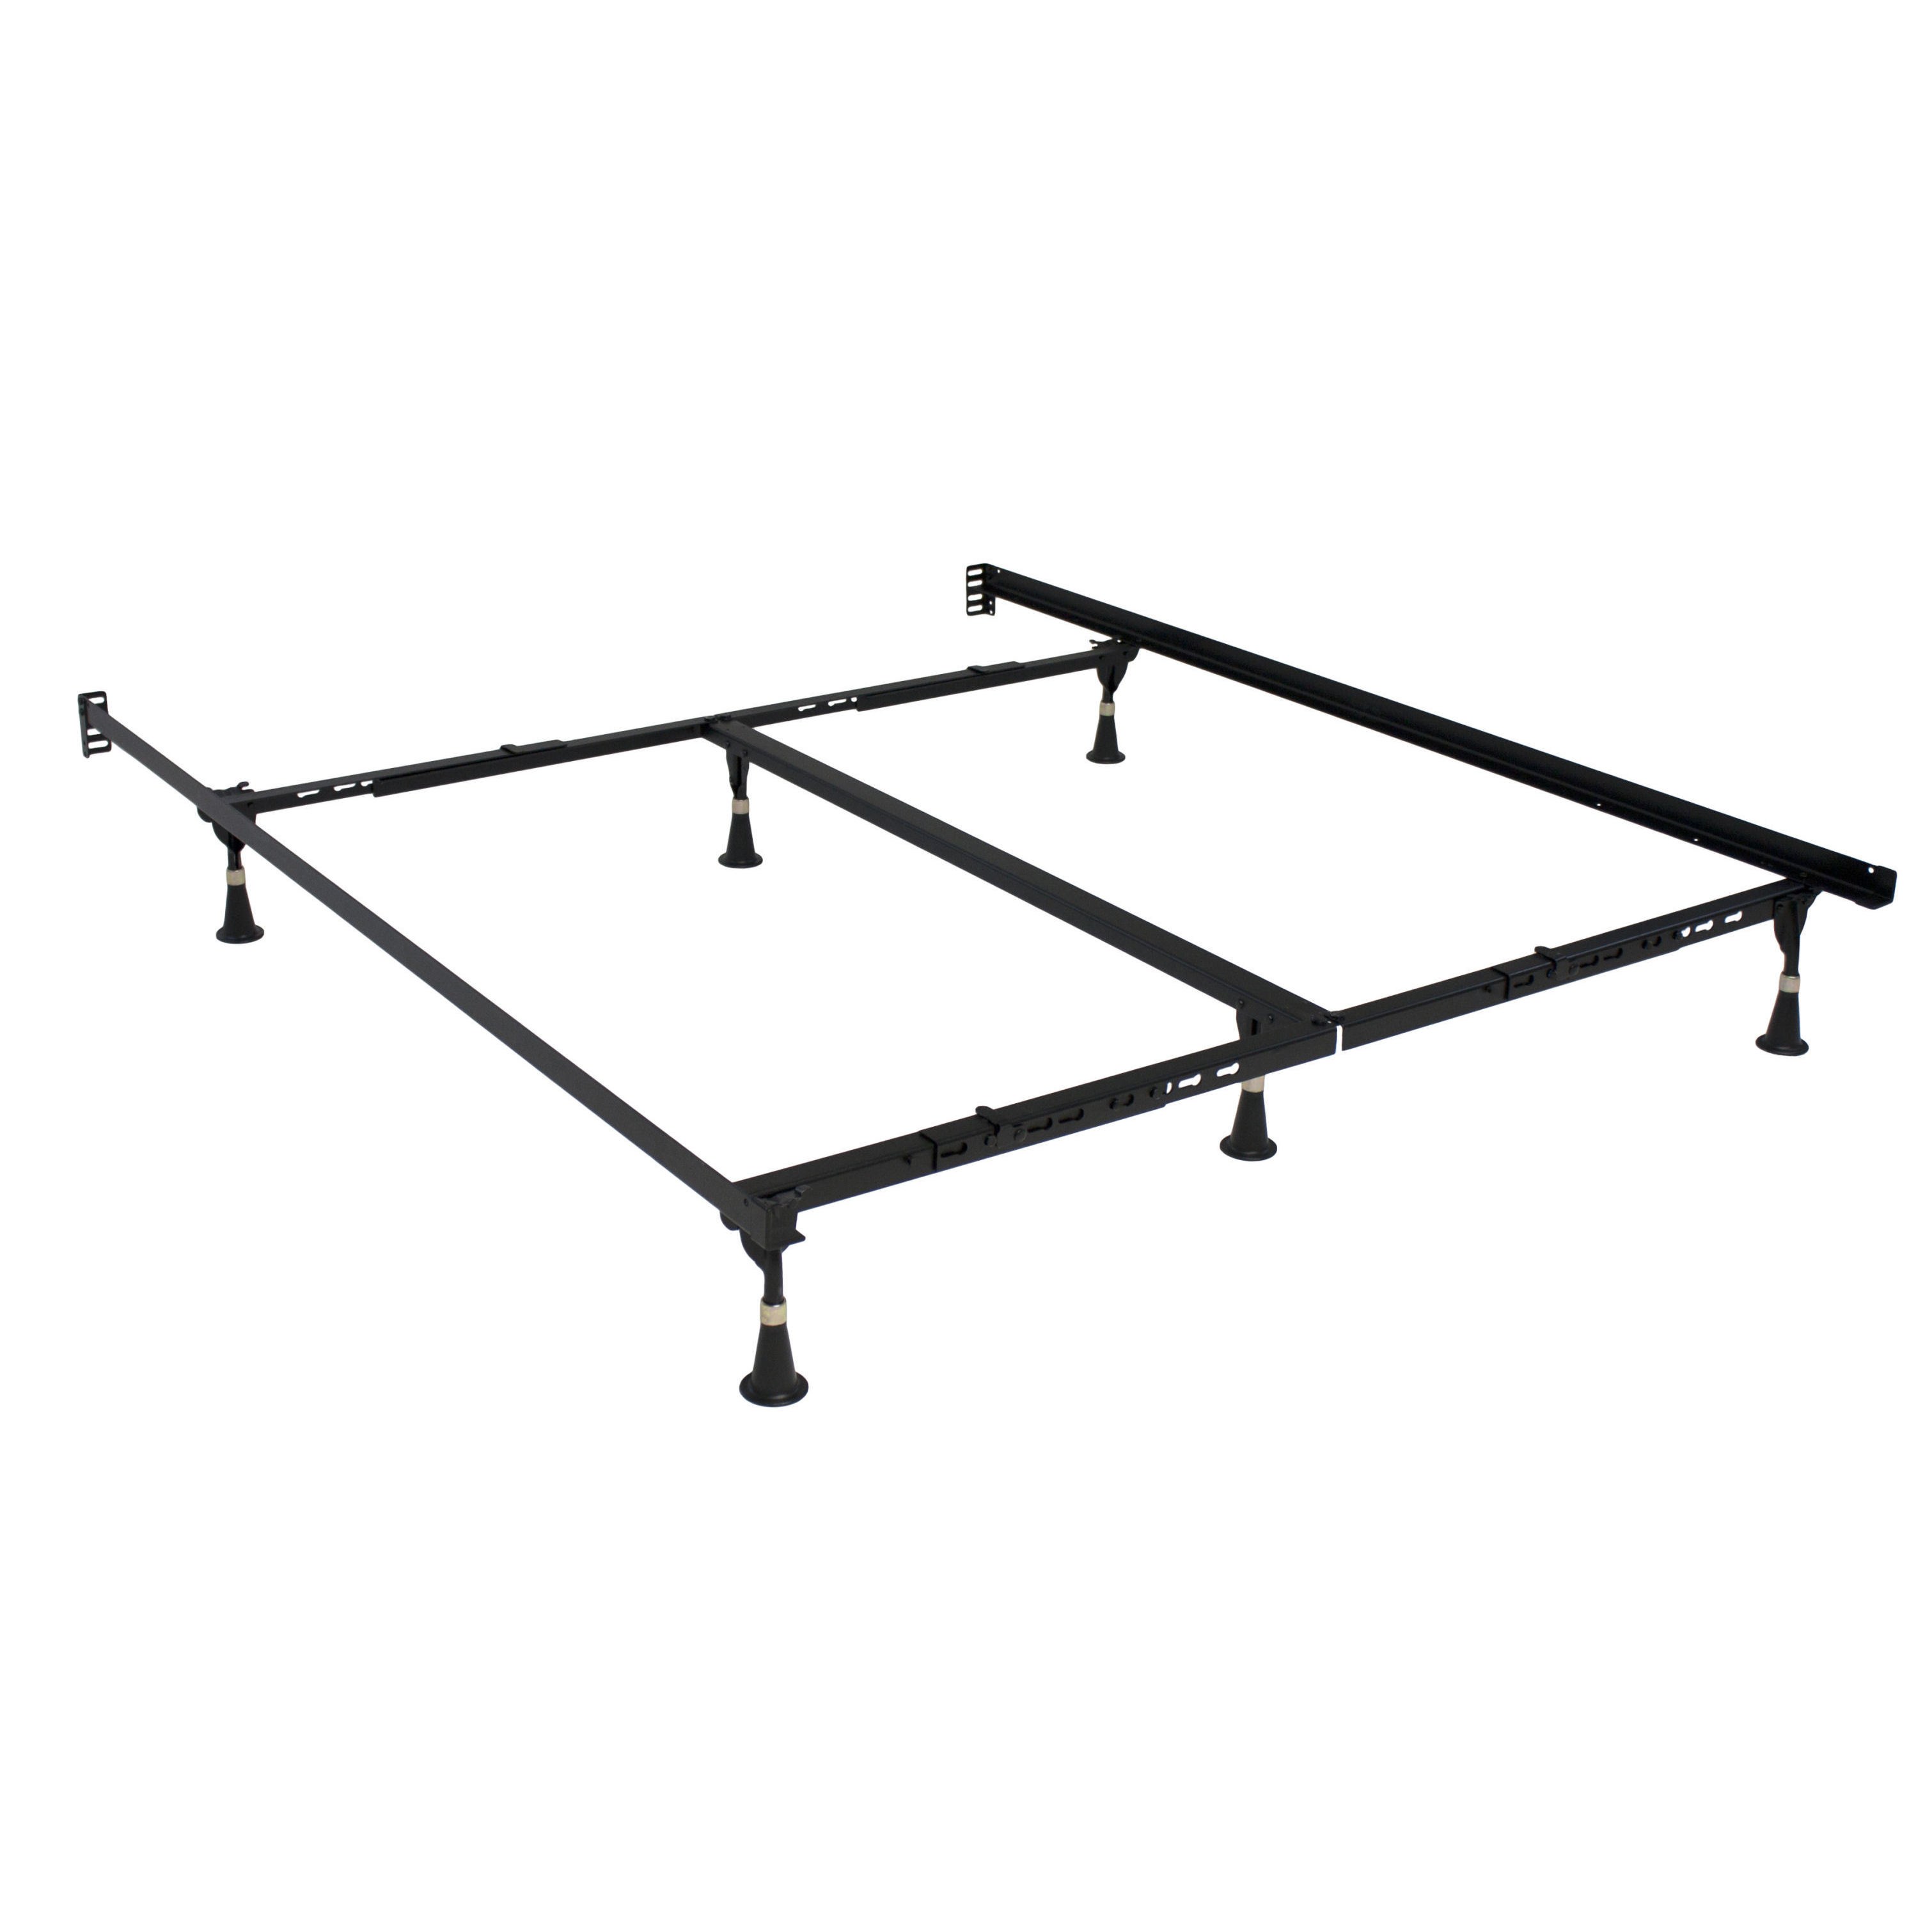 Hollywood Bed Frames Serta Stabl-Base Premium Elite Bed Frame Twin/Full/Queen/Cal King/E. King with 6 Glides - image 2 of 2